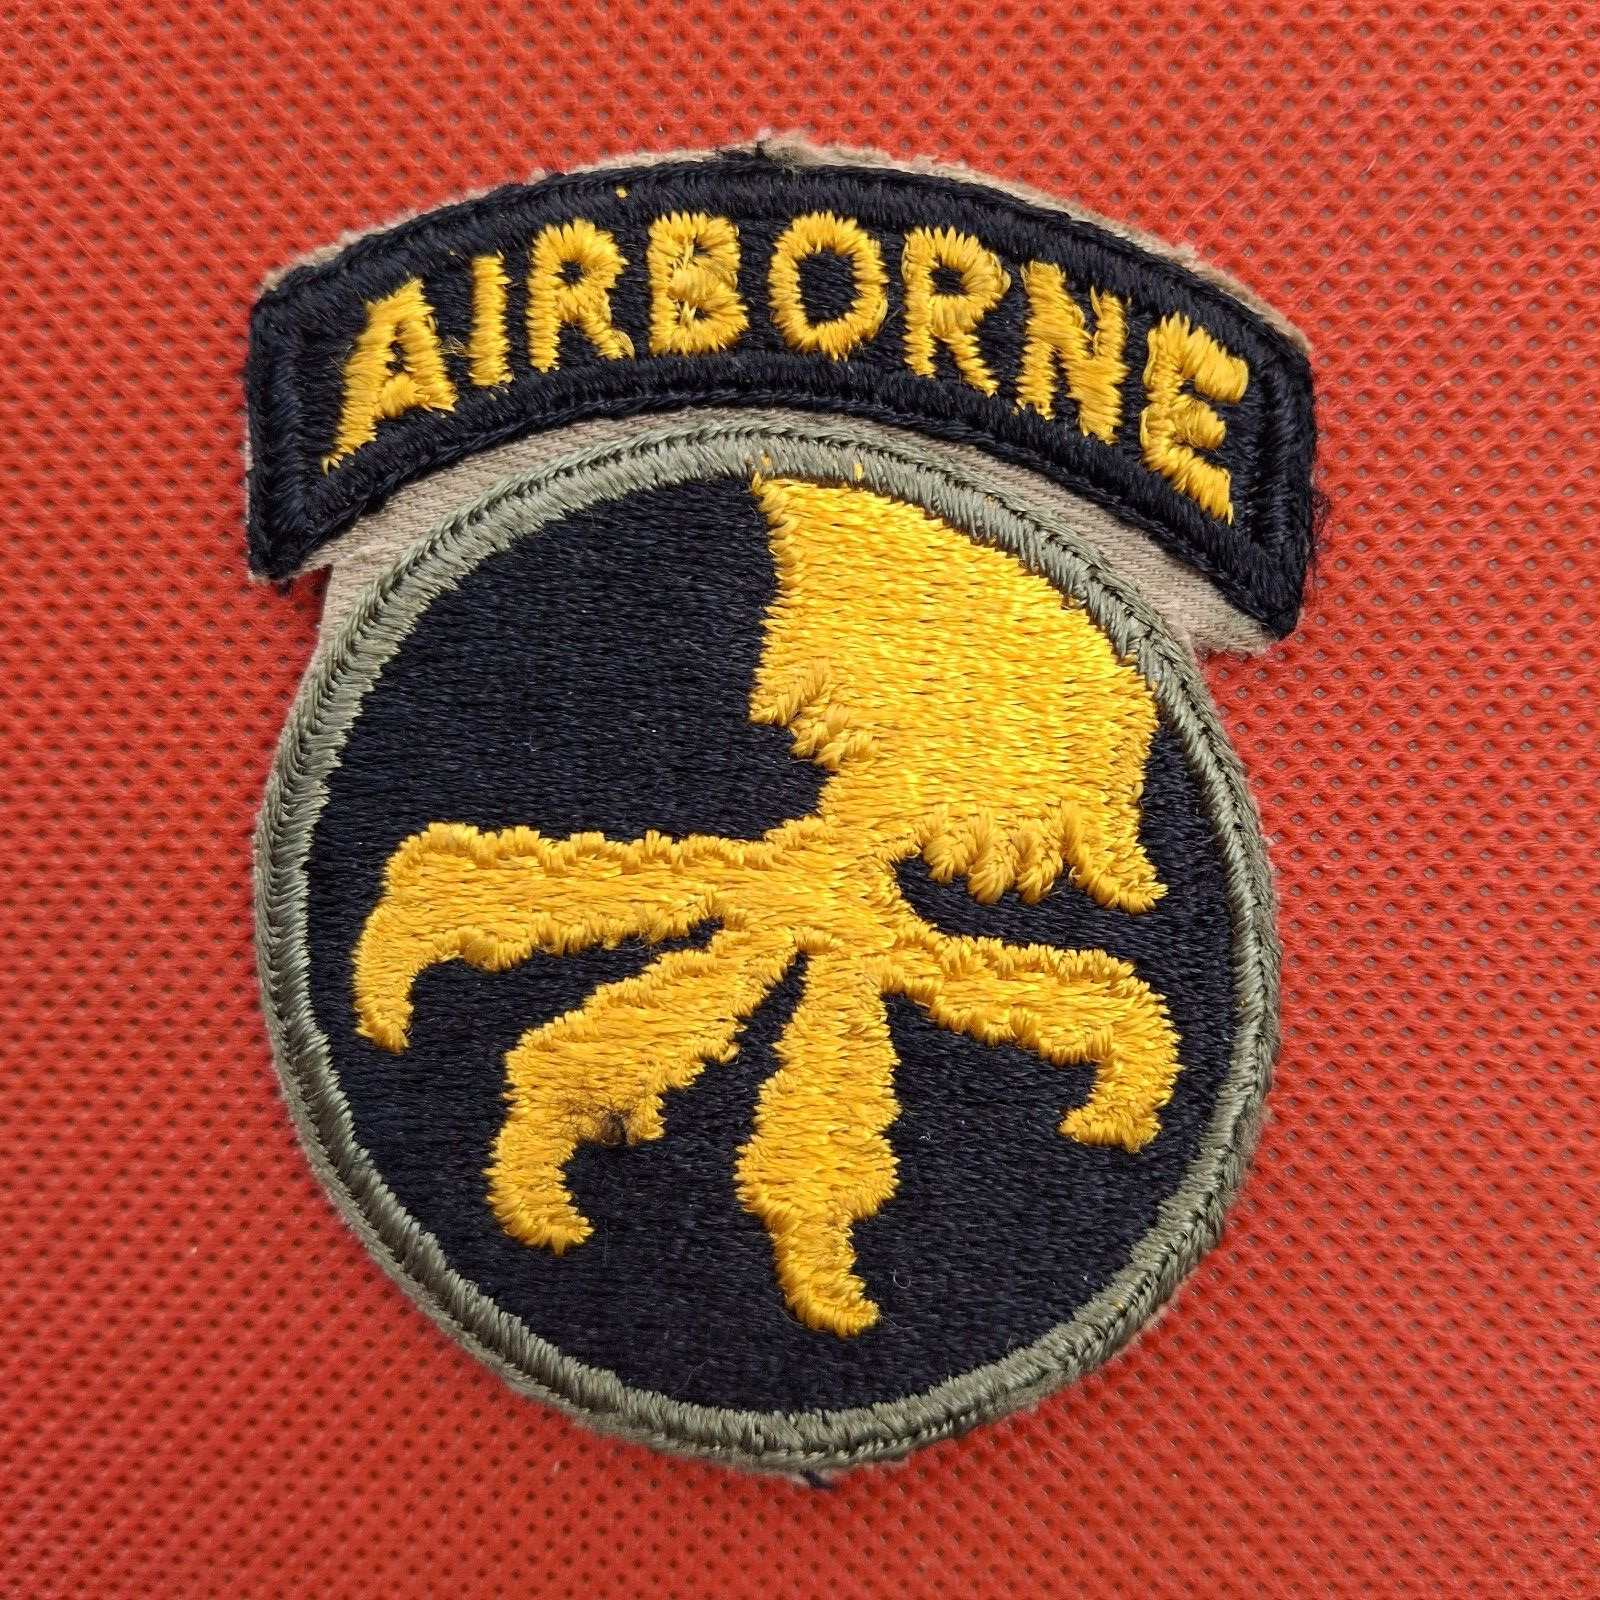 US Army Authentic WW2 Era 17th Airborne Division w/Attached Tab Patch